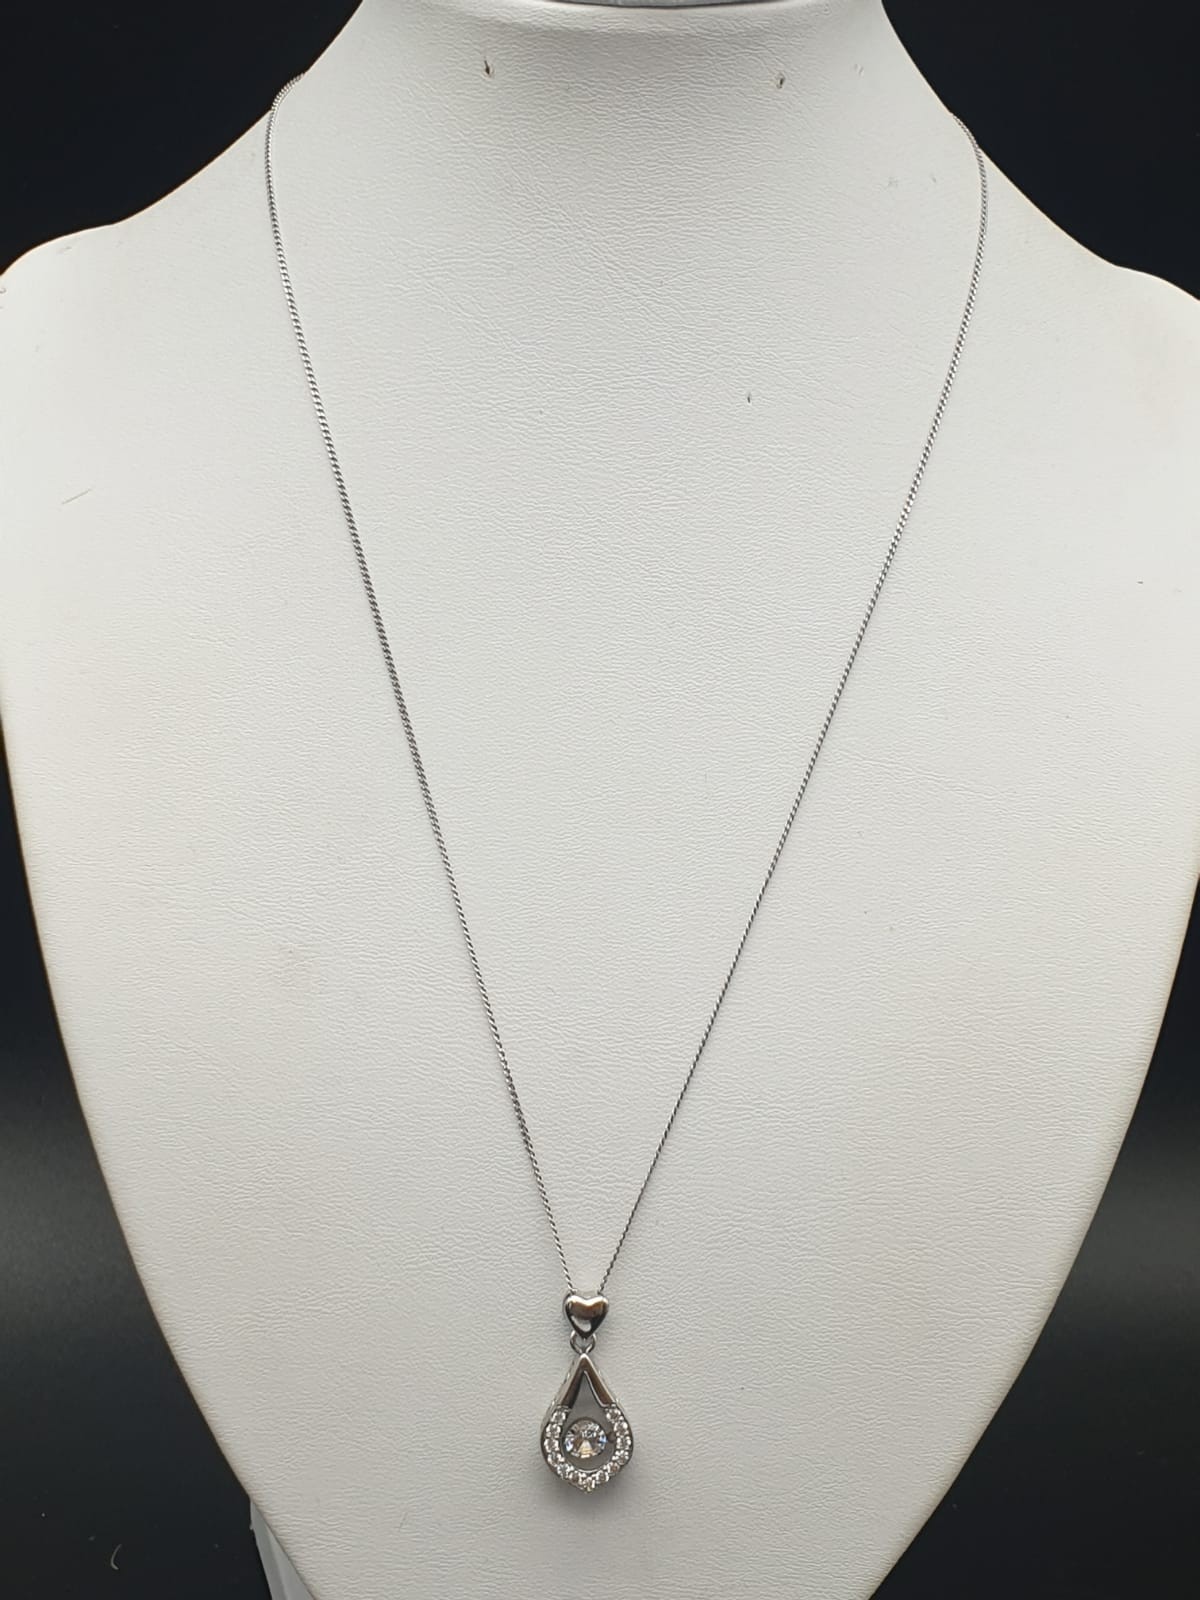 Sterling silver Stone Set Heart and Pearl Shape Pendant Necklace. 18 inches in presentation box. - Image 2 of 3